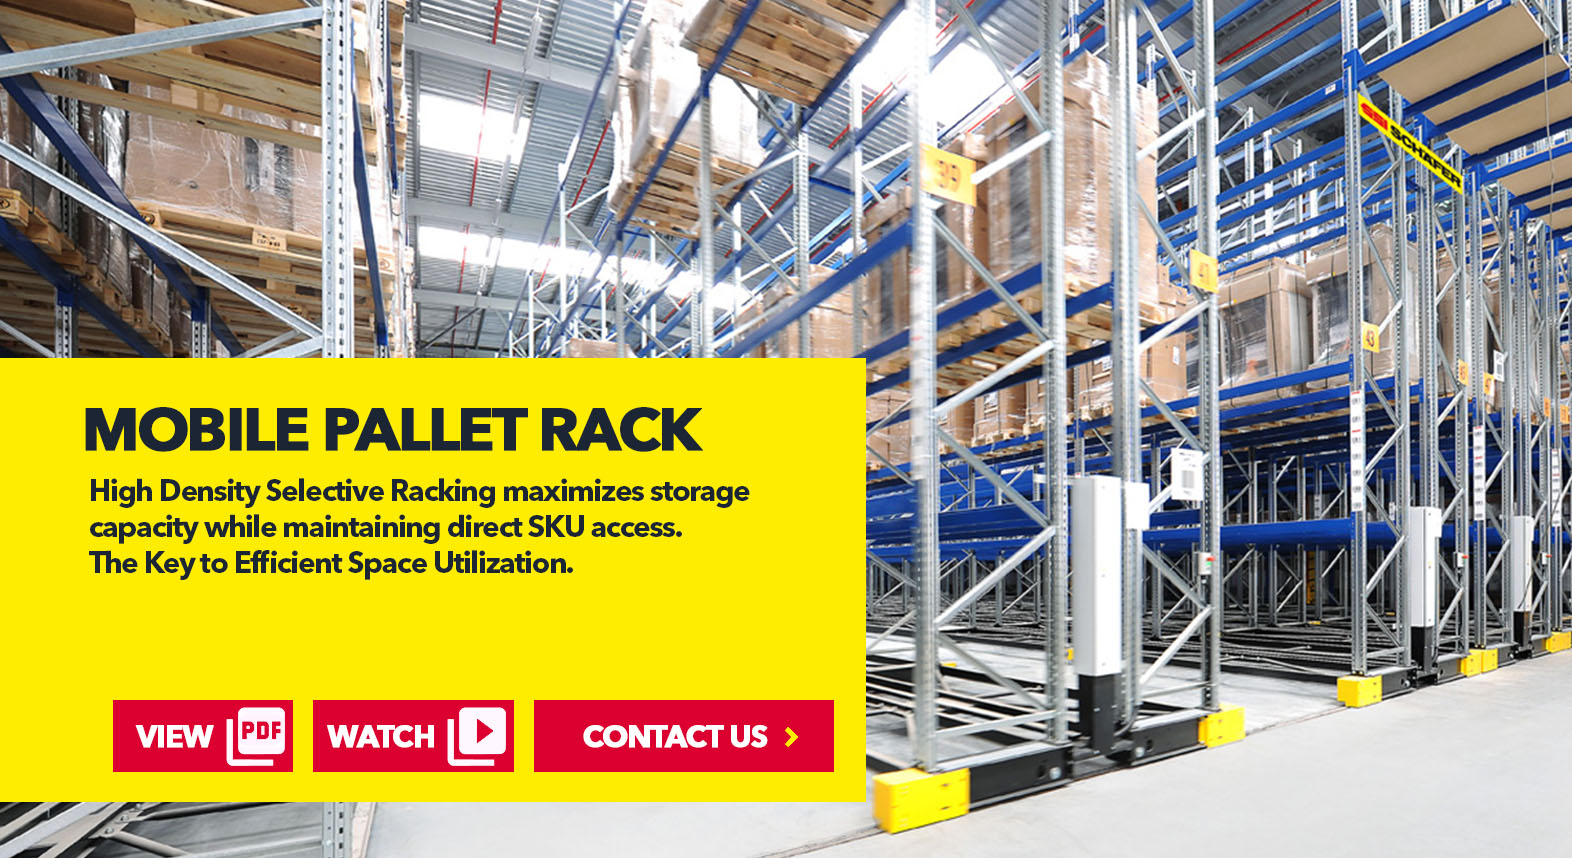 Mobile Pallet Rack by SSI Schaefer USA Download Guide, Watch Video, Contact Us. www.chaefershelving.com